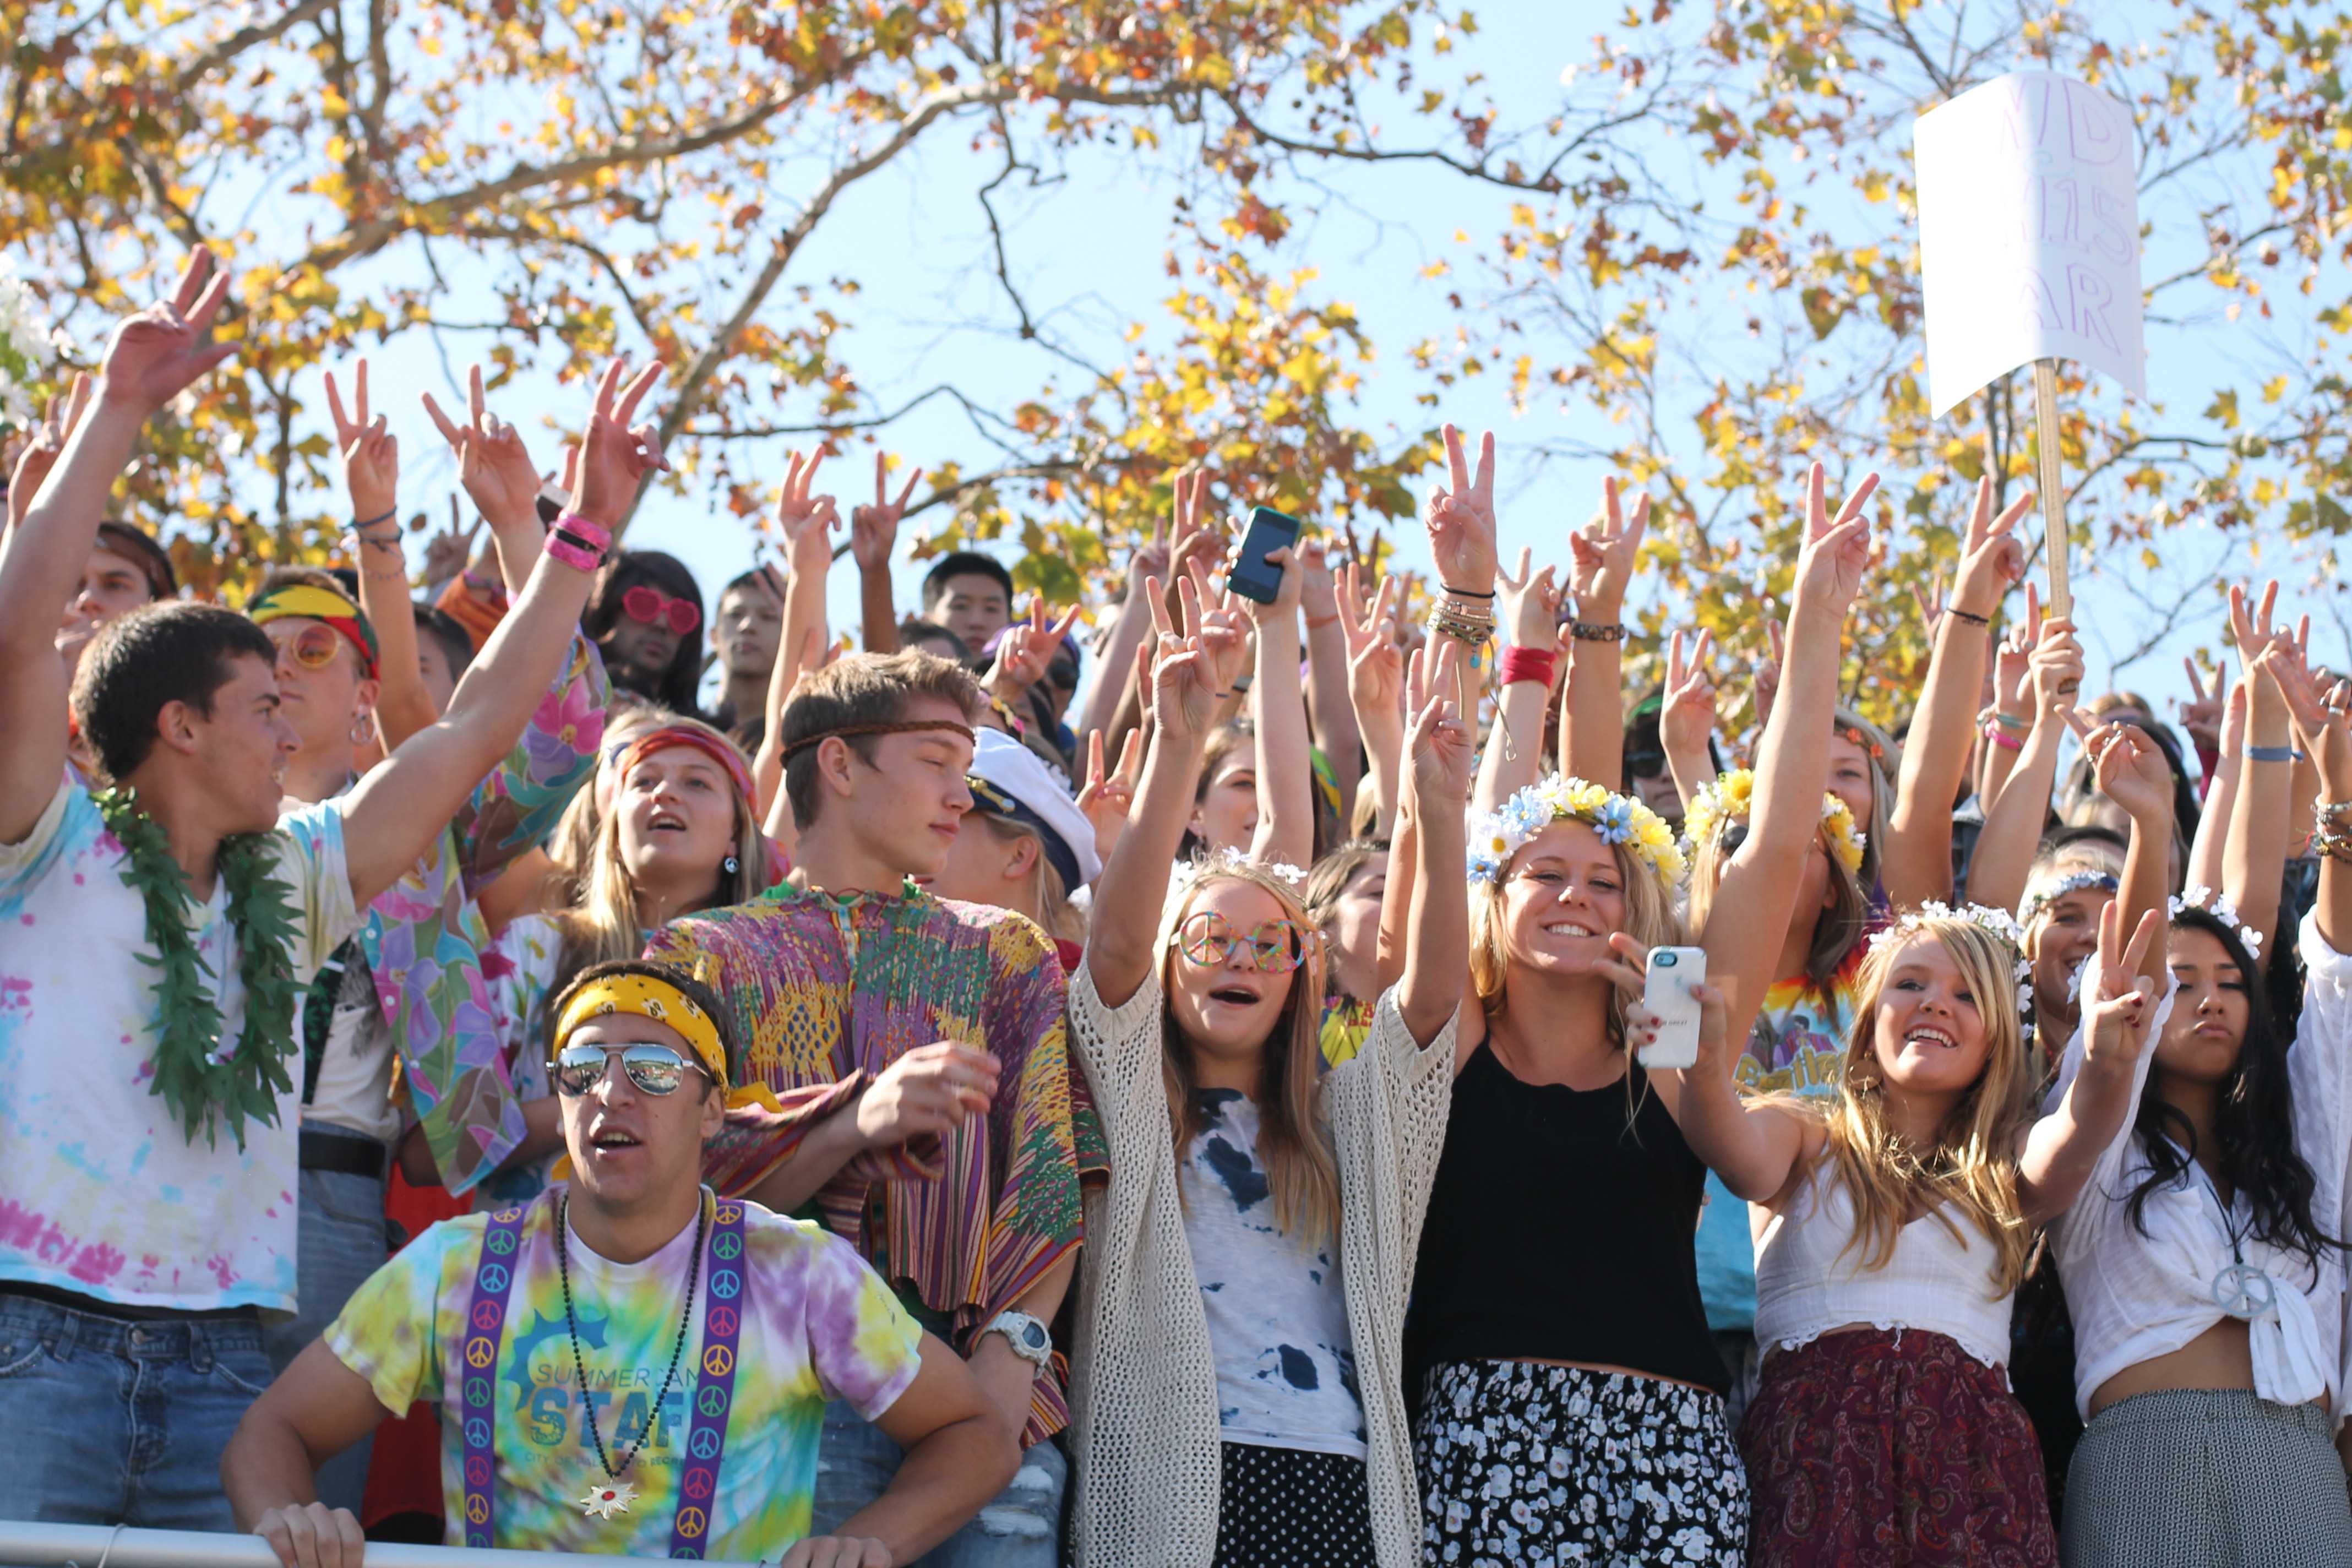 The juniors cheer during Spirit Week 2013.  Juniors dressed as hippies to follow along with their theme of "Yellow Submarine." Photo by Molly Fogarty and Cathy Rong.